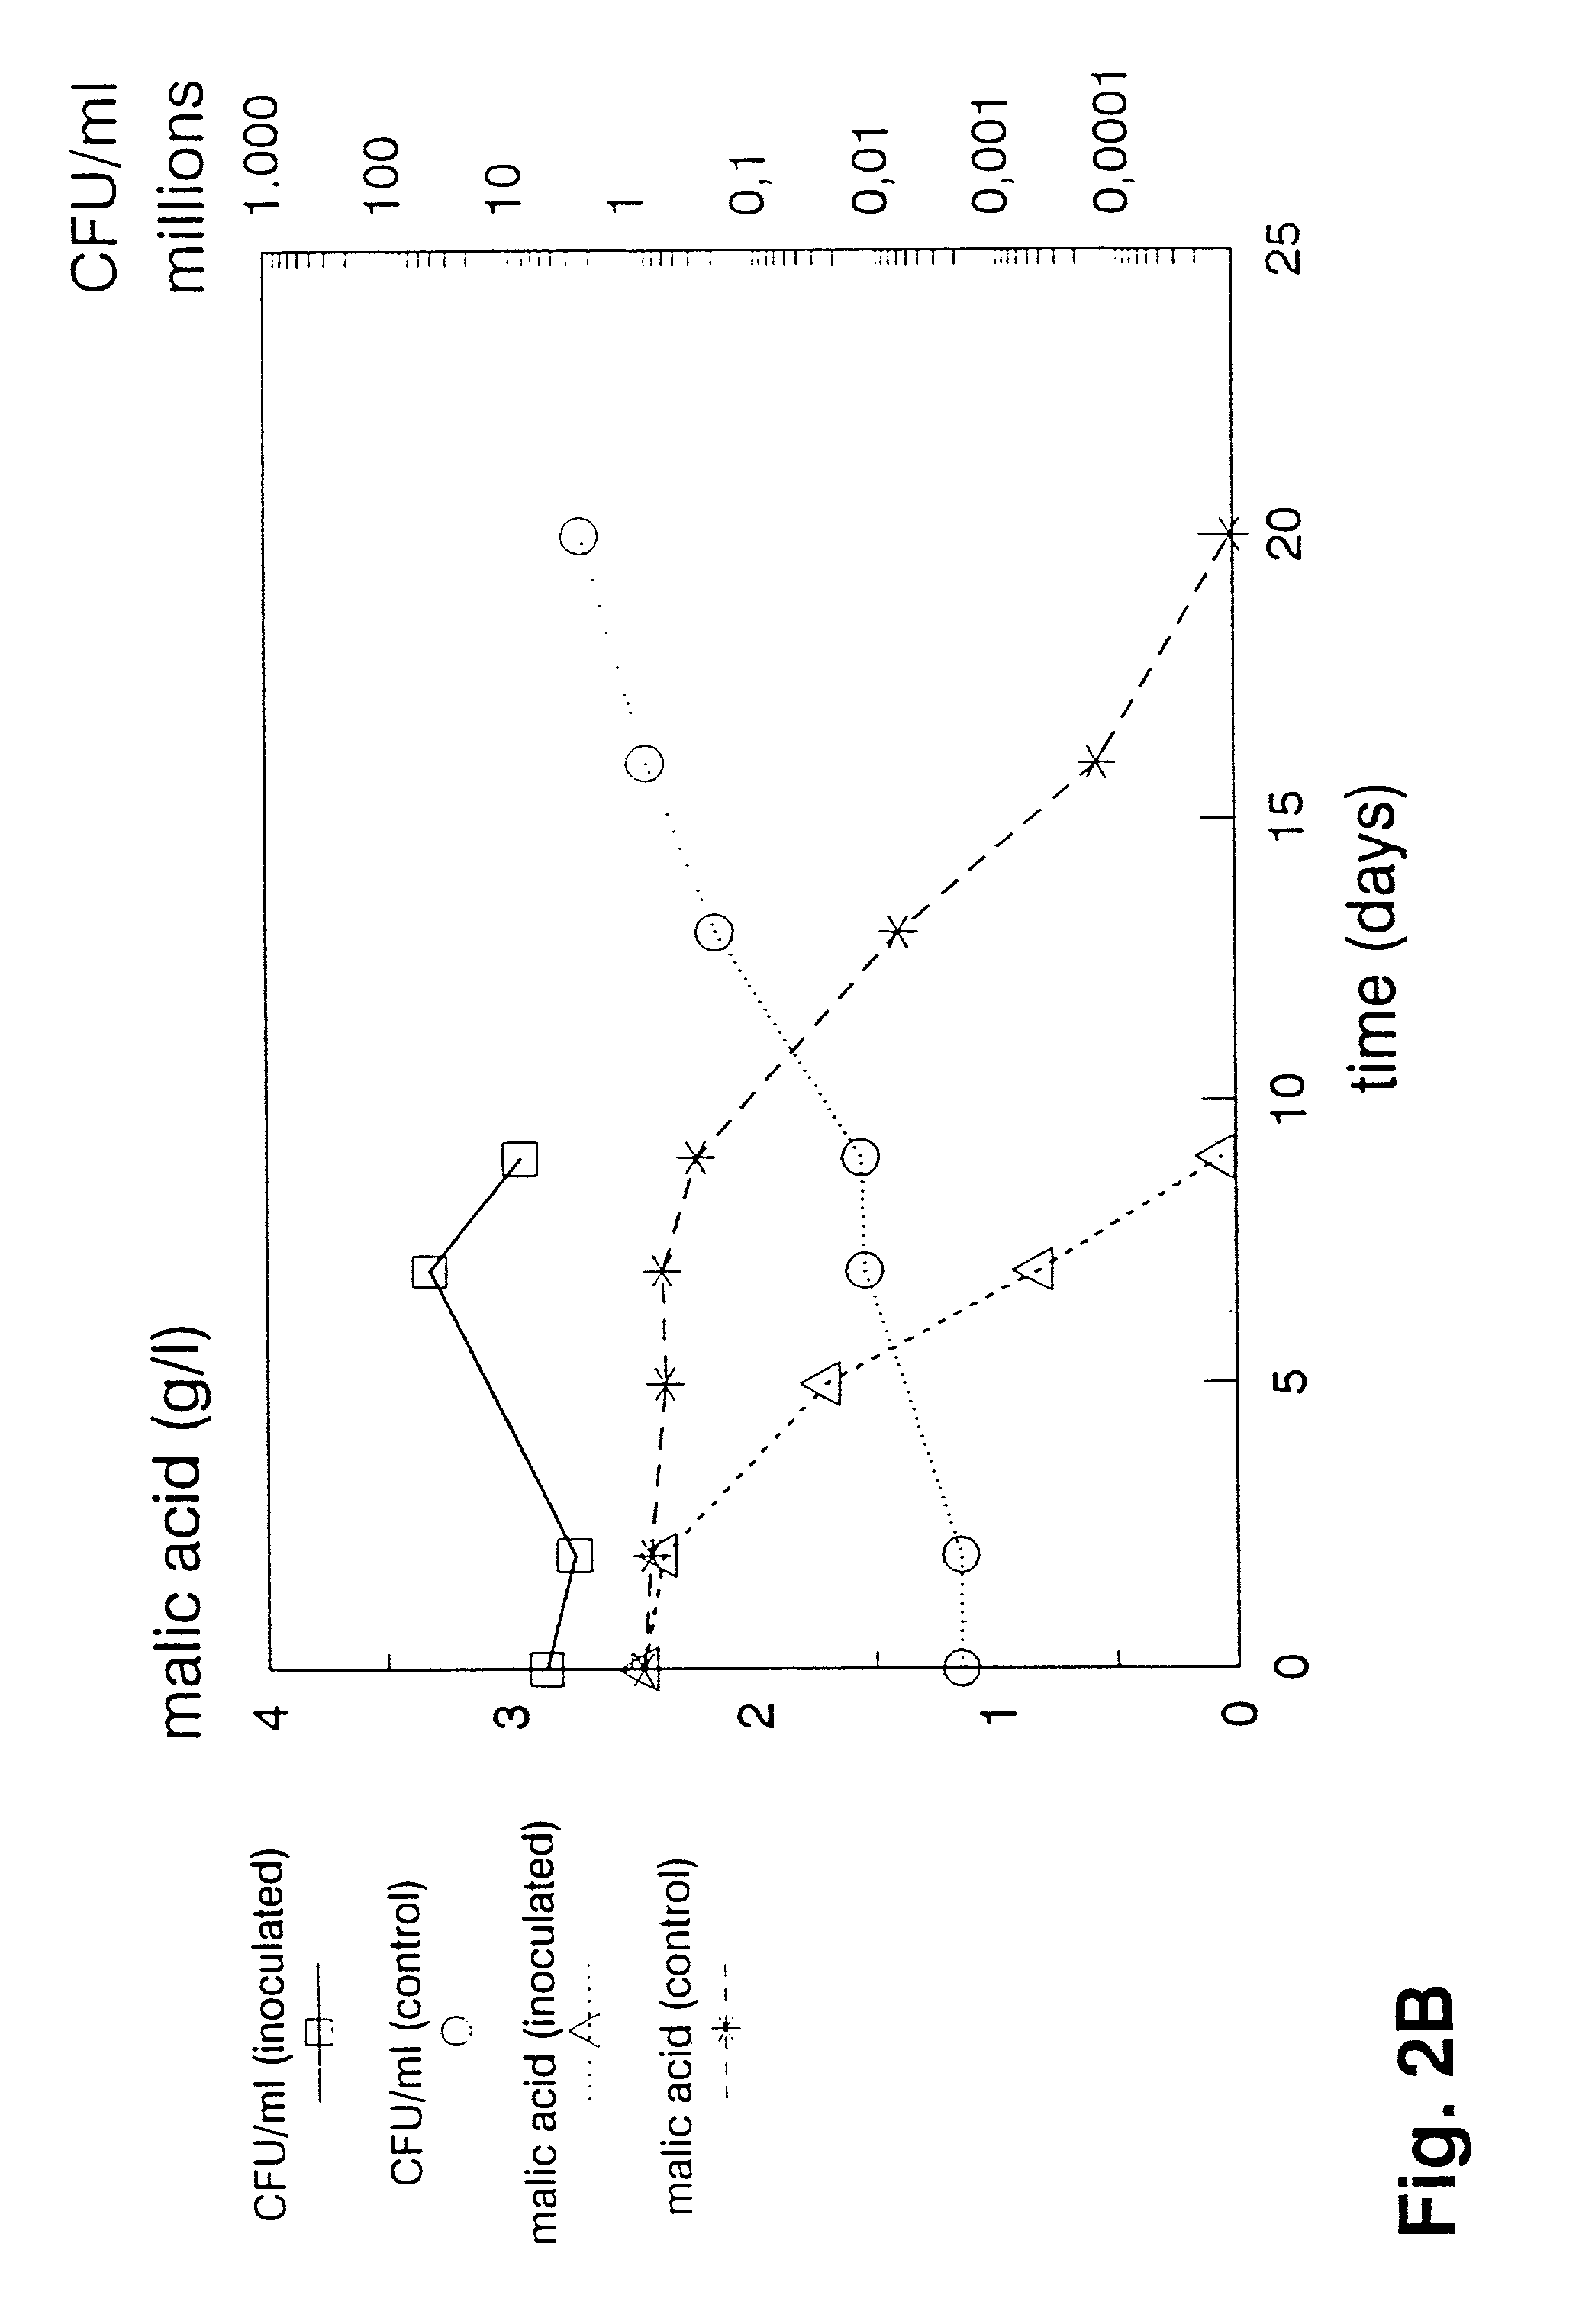 Method of inducing malolactic fermentation in wine or fruit juice by direct inoculation with a non-activated starter culture